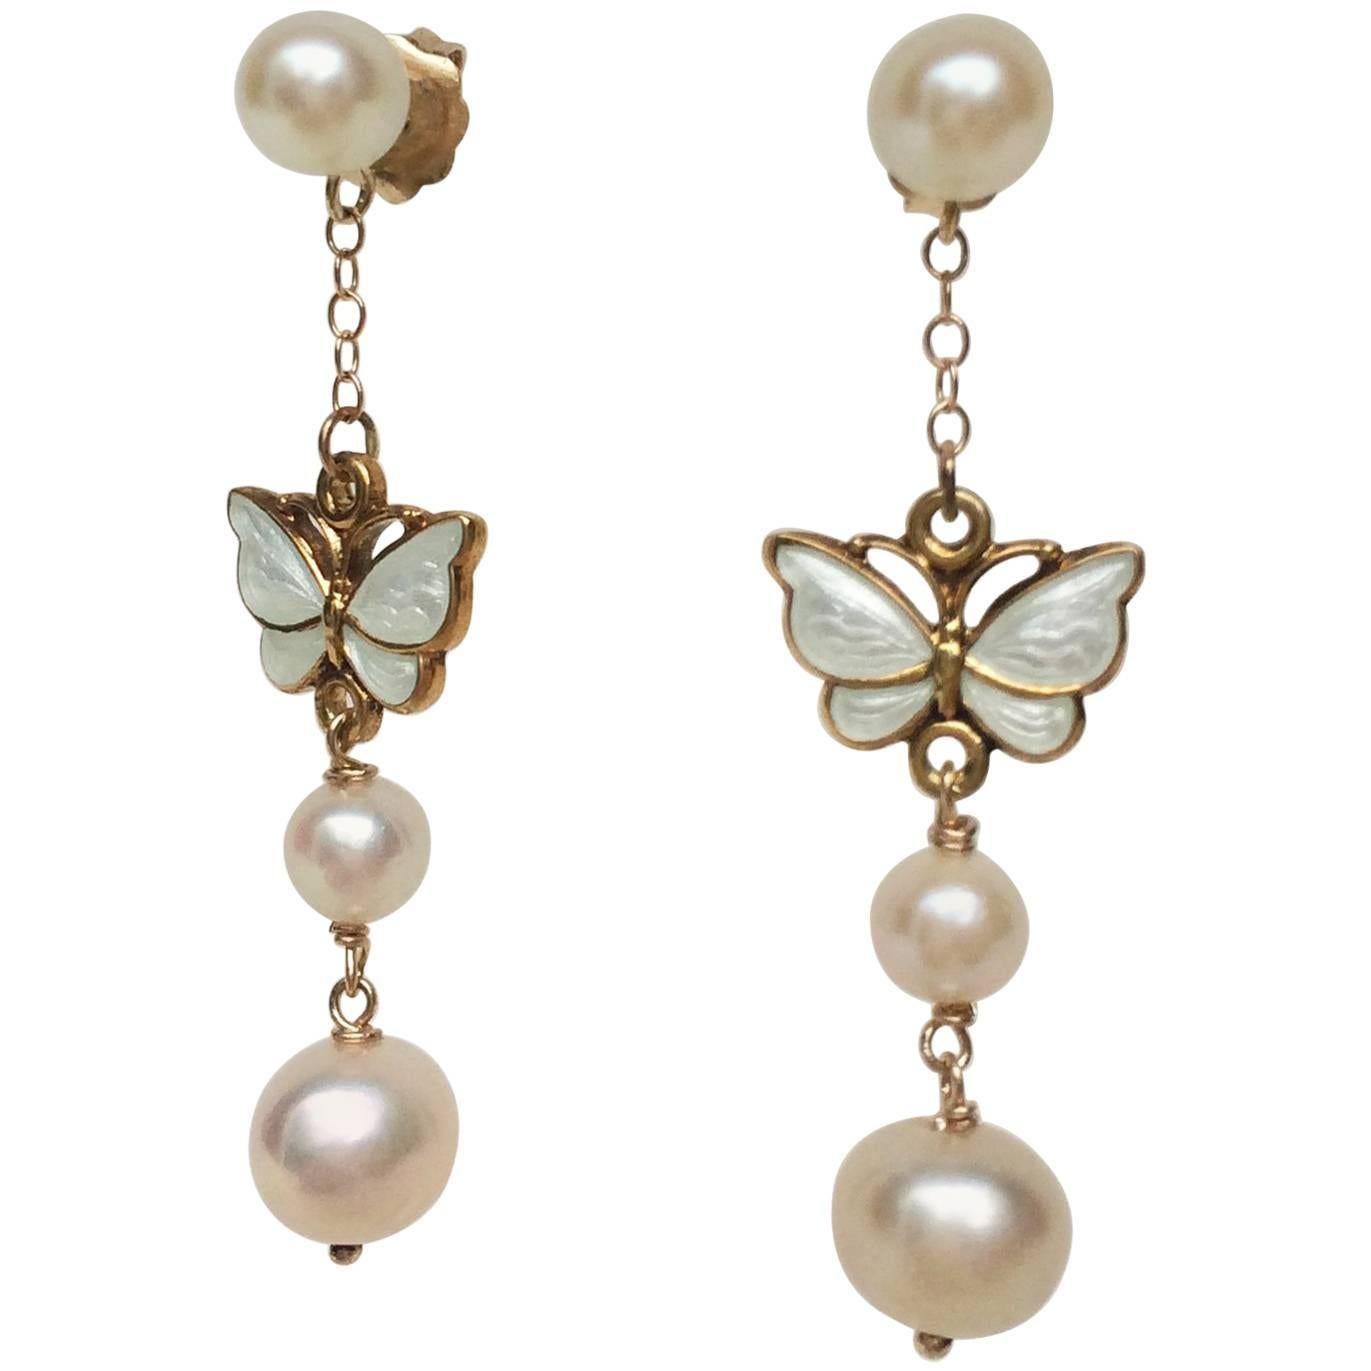 Marina J Pearl Earrings with Vintage White Enamel Butterfly and 14 k Yellow gold